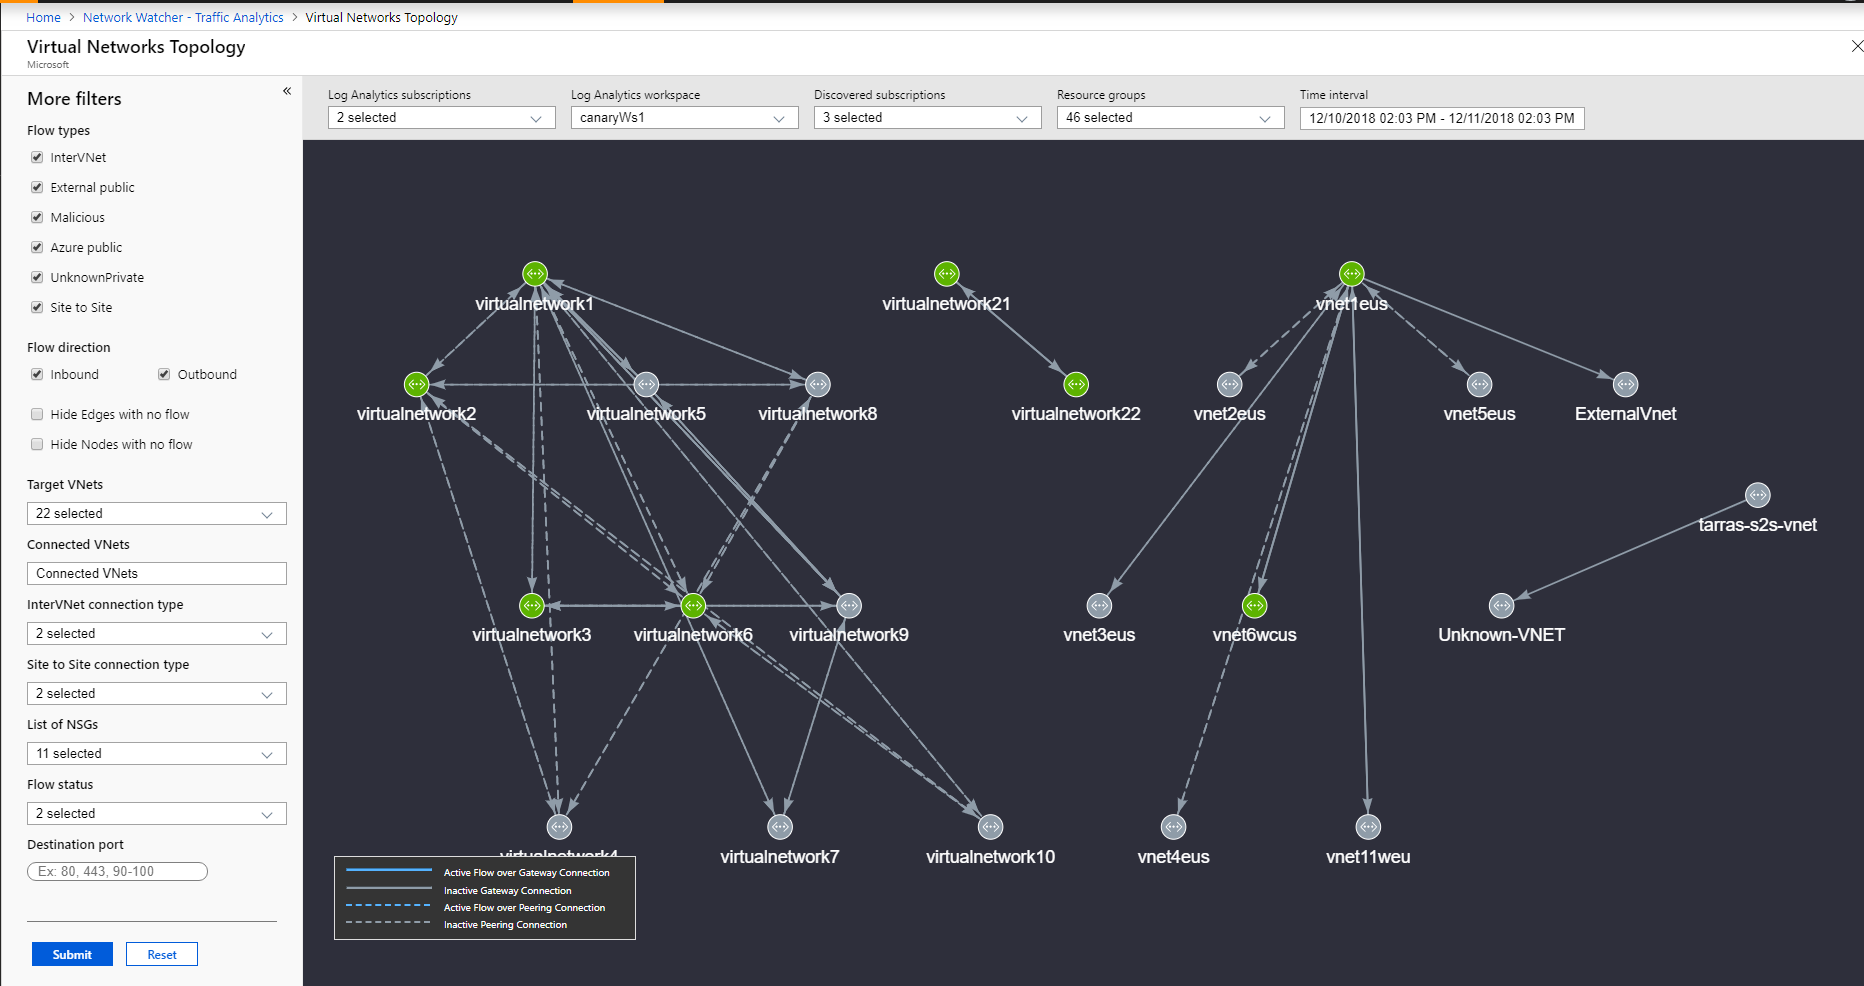 Screenshot of virtual network topology showcasing top level and more filters.